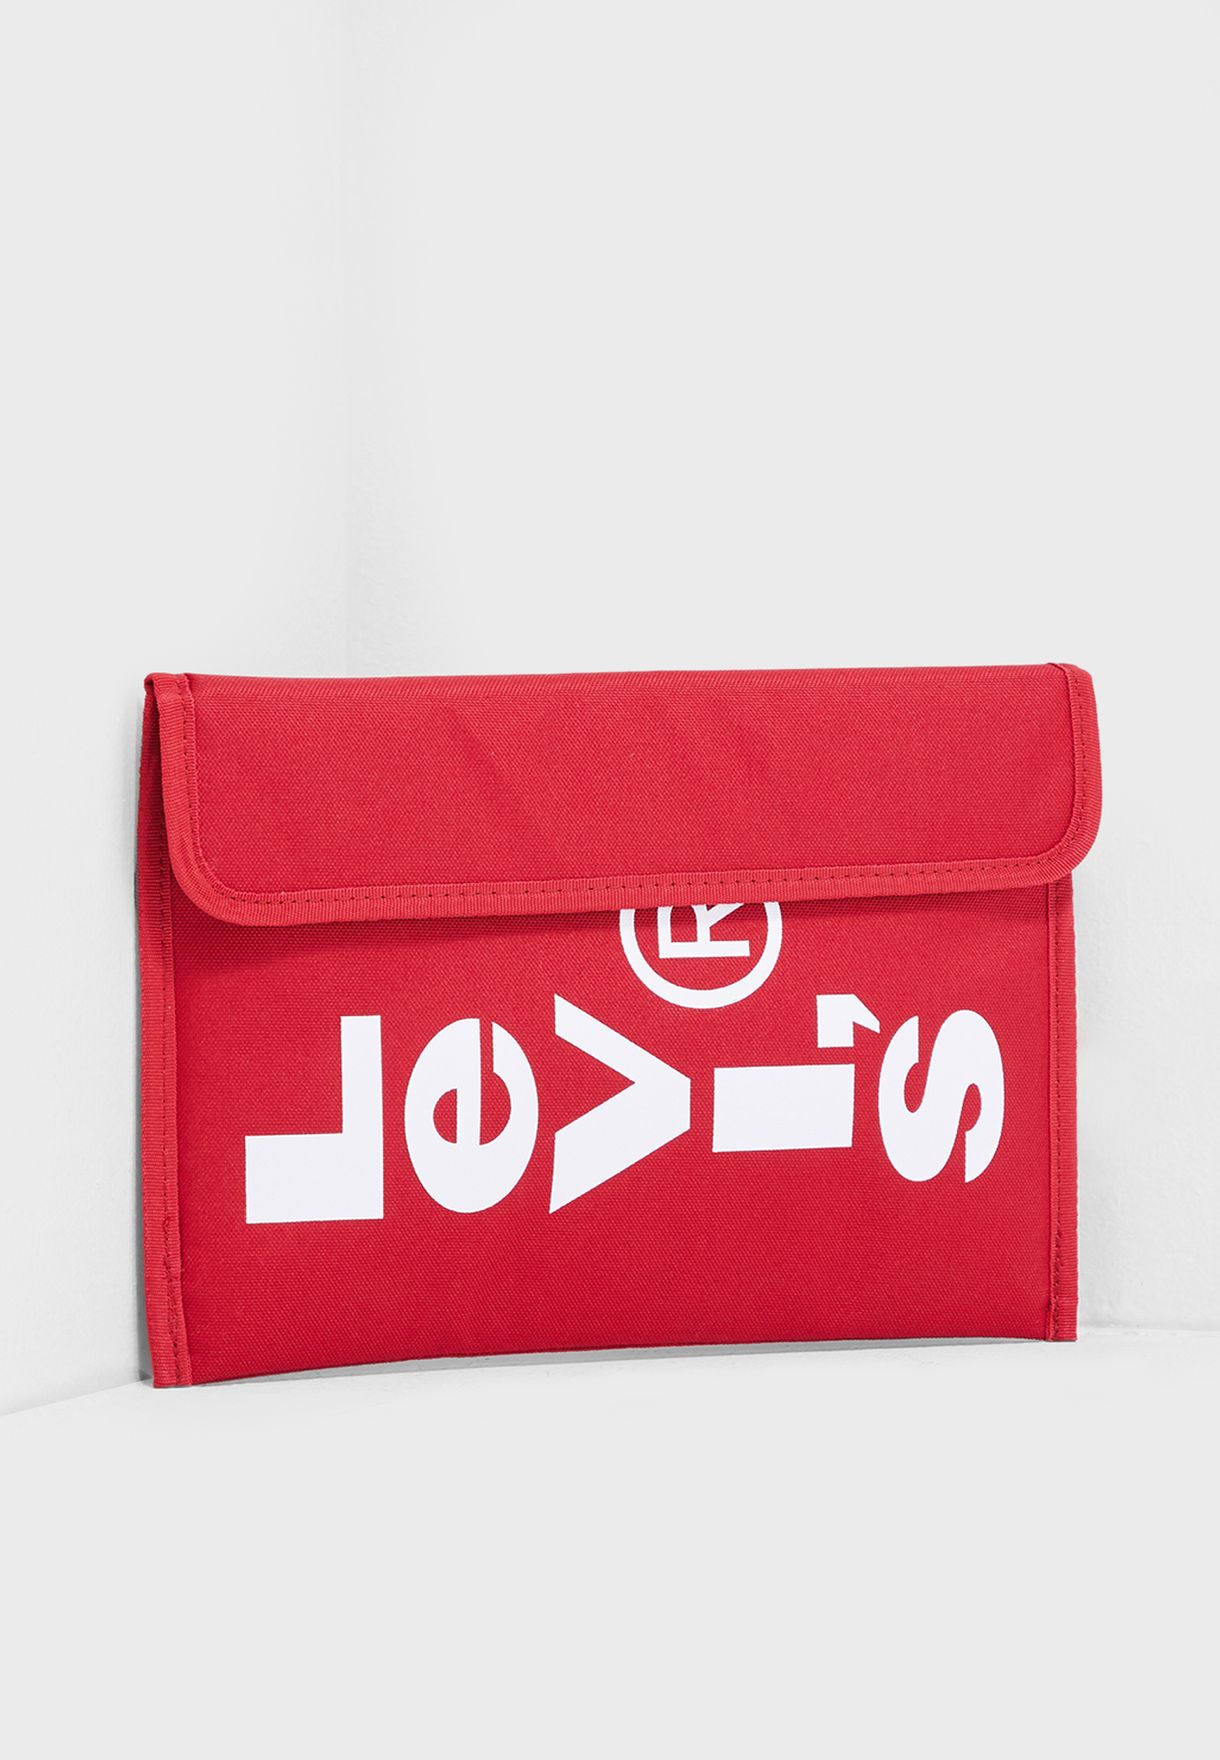 levis red wallet